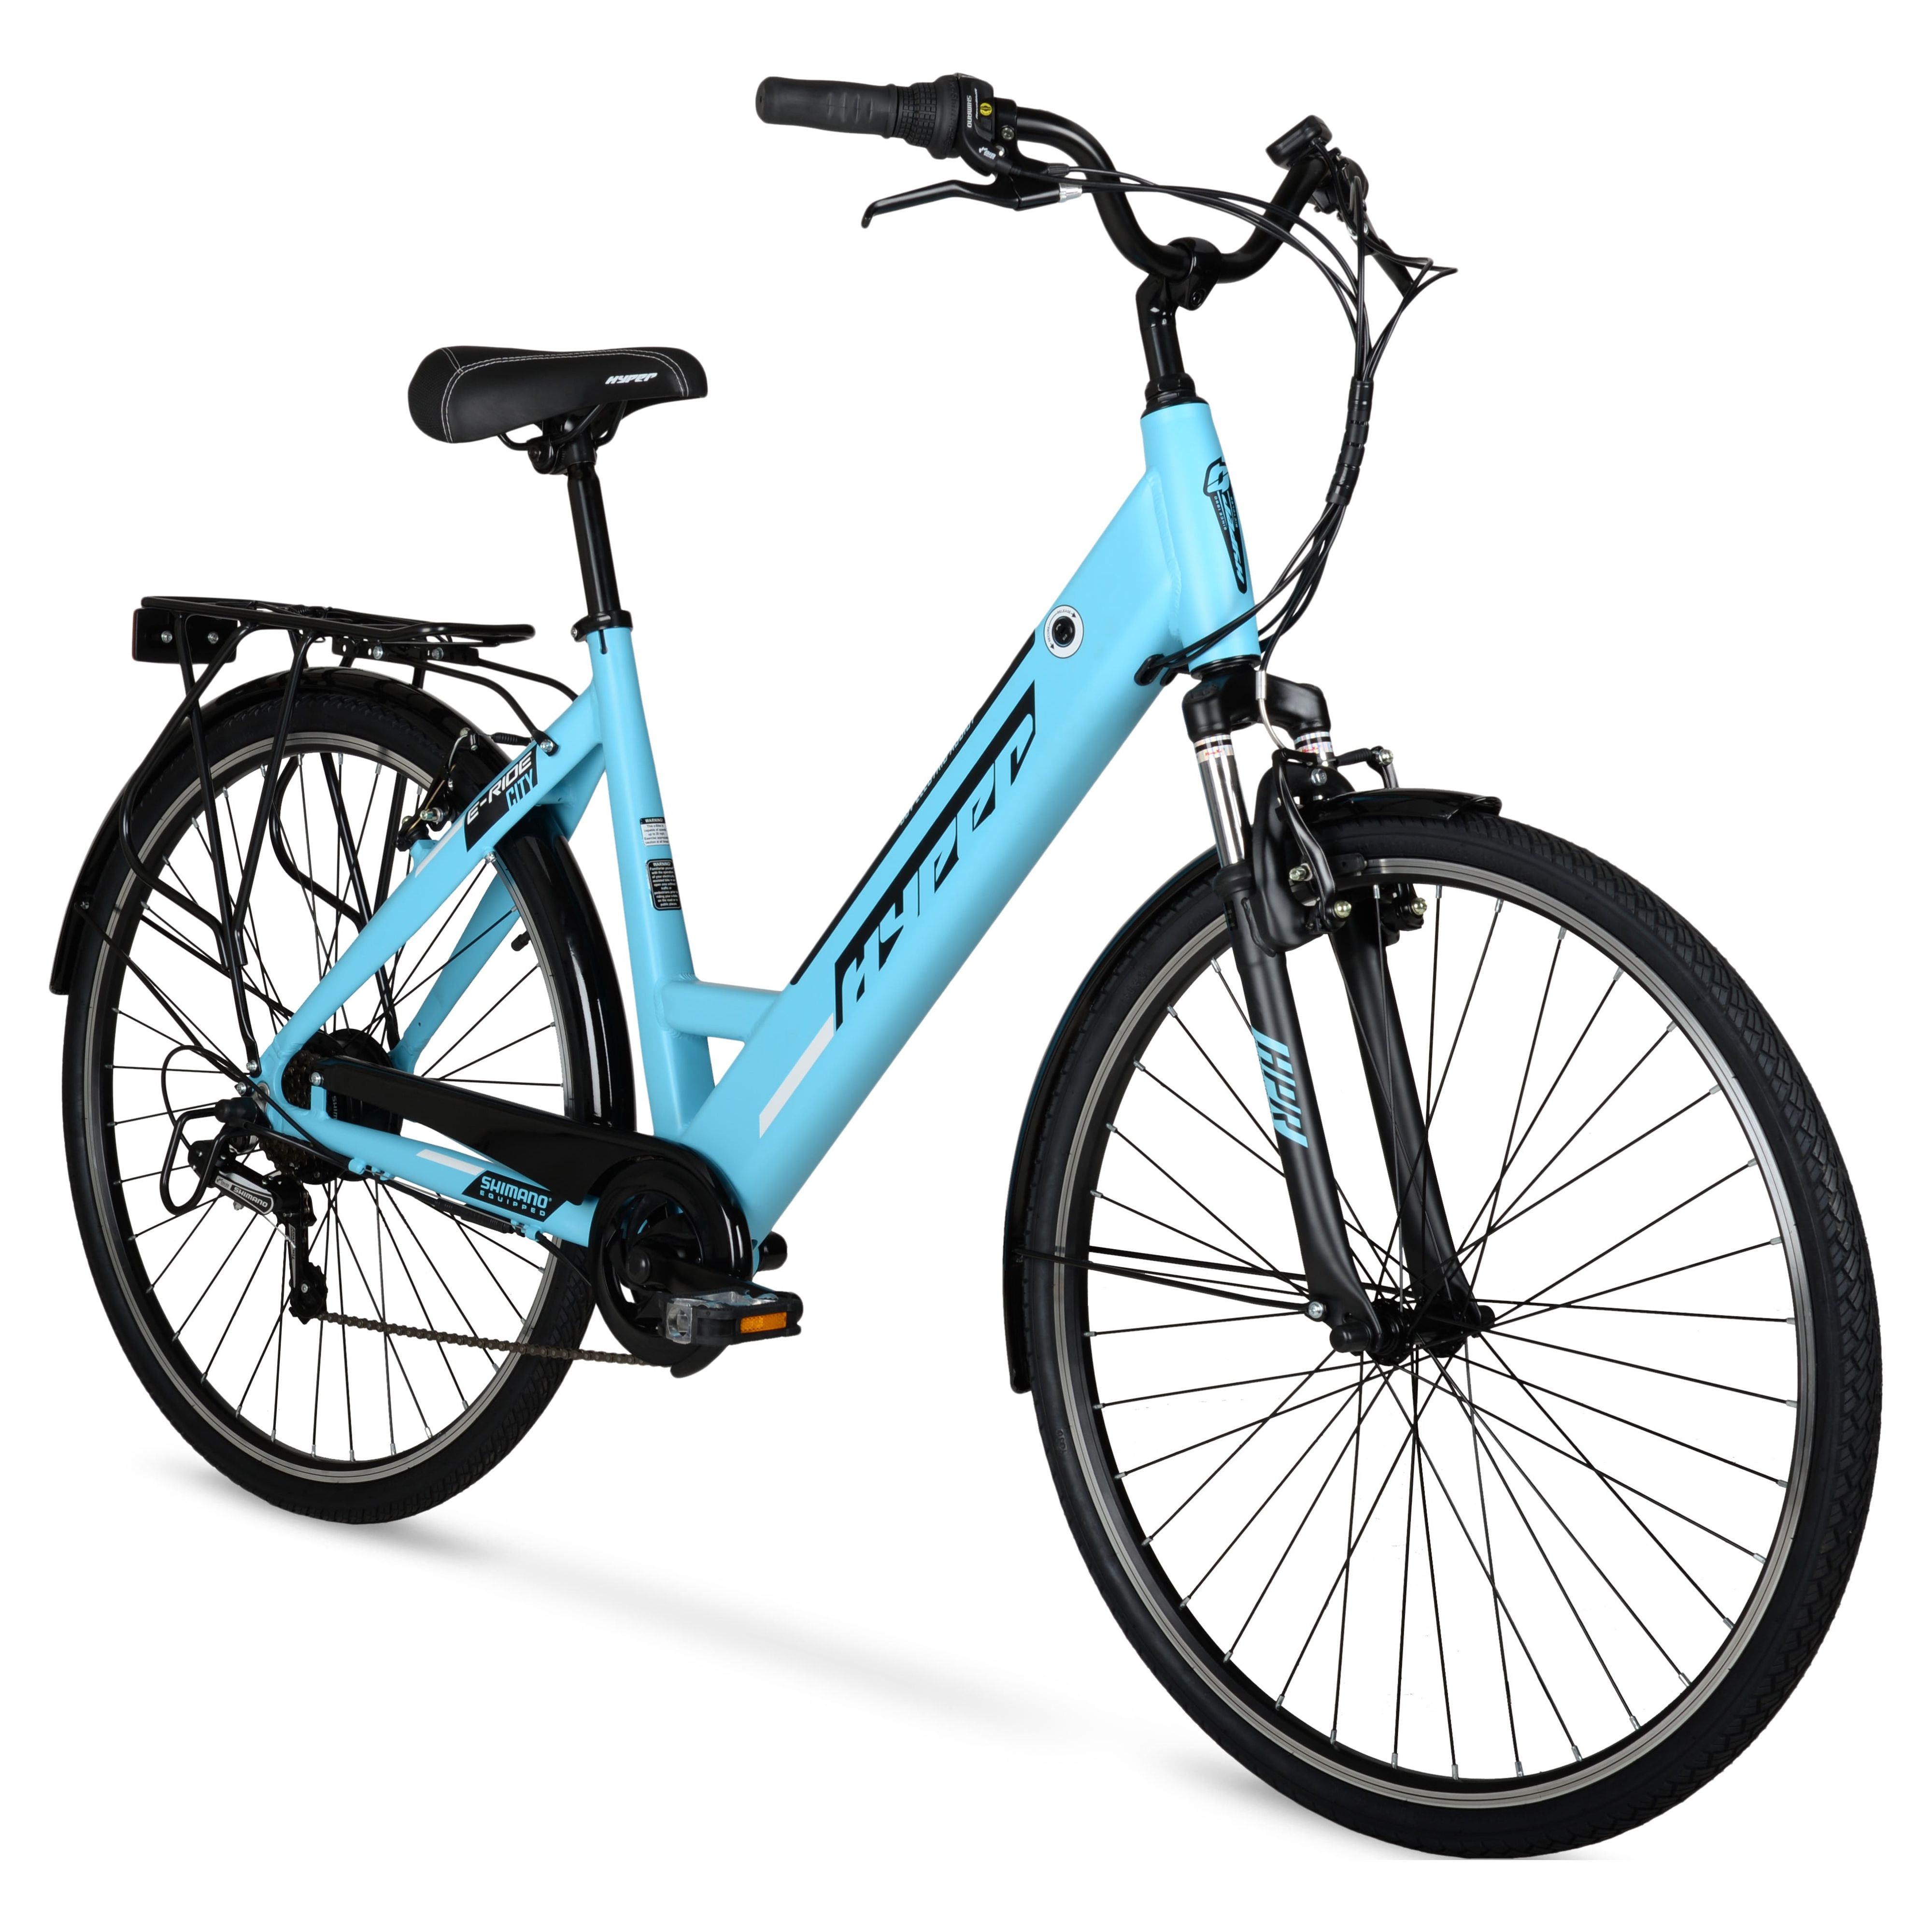 Hyper Bicycles E-Ride 700C 36V Electric Commuter E-Bike for Adults, Pedal-Assist, 250W Motor, Blue - image 1 of 18